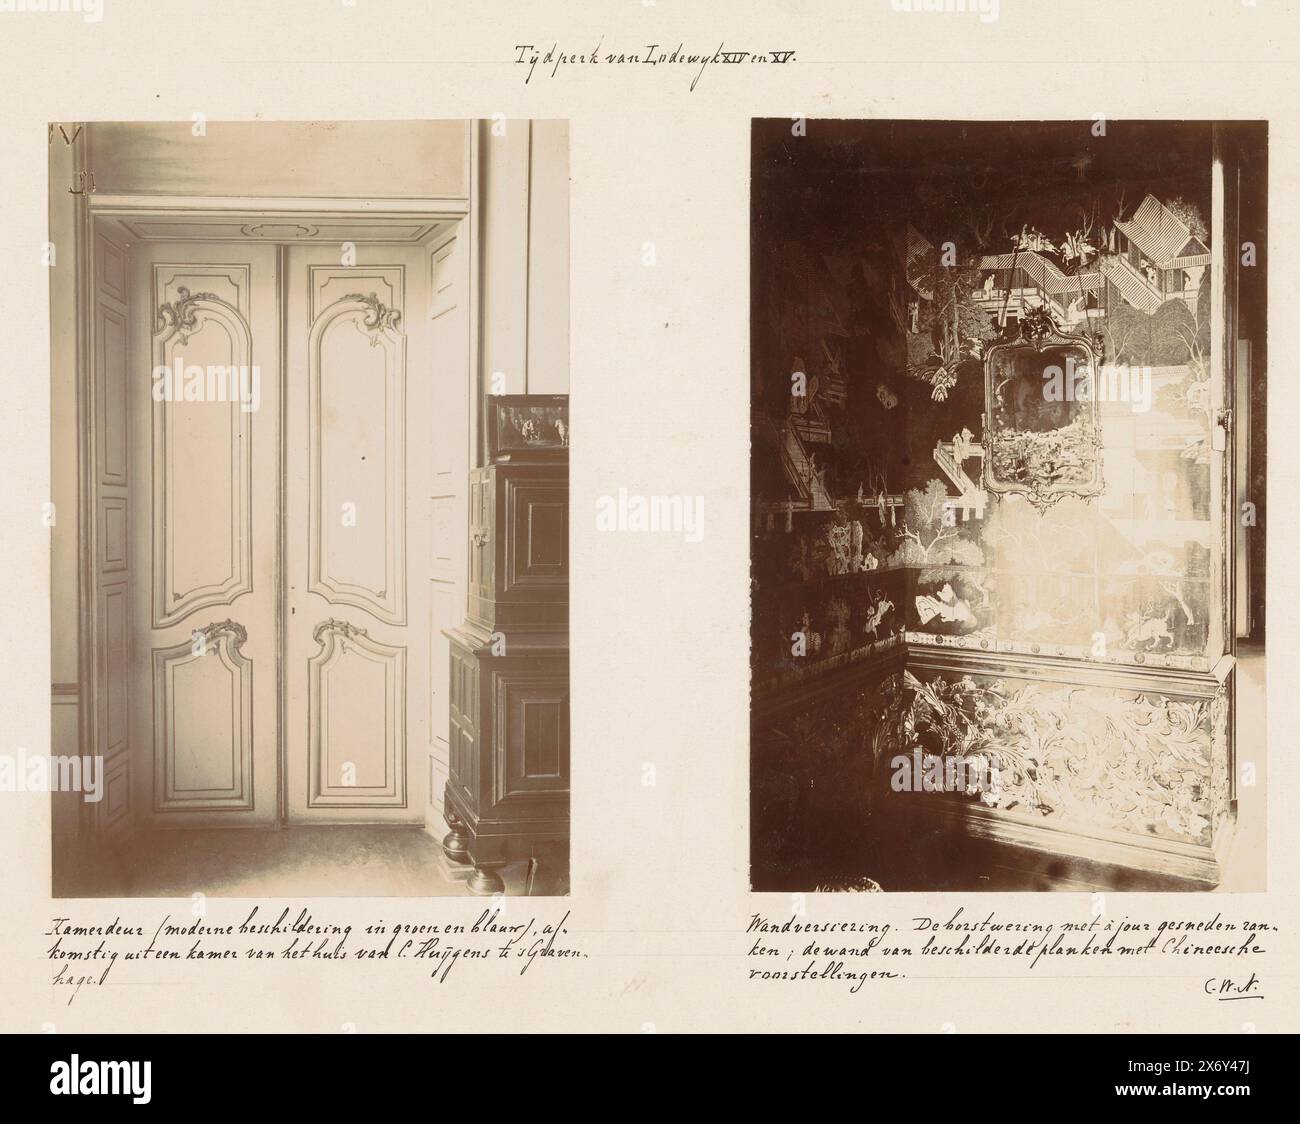 Room door and wall paneling, on the left a room door decorated with a stylized leaf motif, on the right a wall paneling in Chinese lacquer, from the palace of the Frisian governors., photograph, anonymous, Europe, c. 1875 - c. 1900, cardboard, height, 314 mm × width, 446 mm Stock Photo